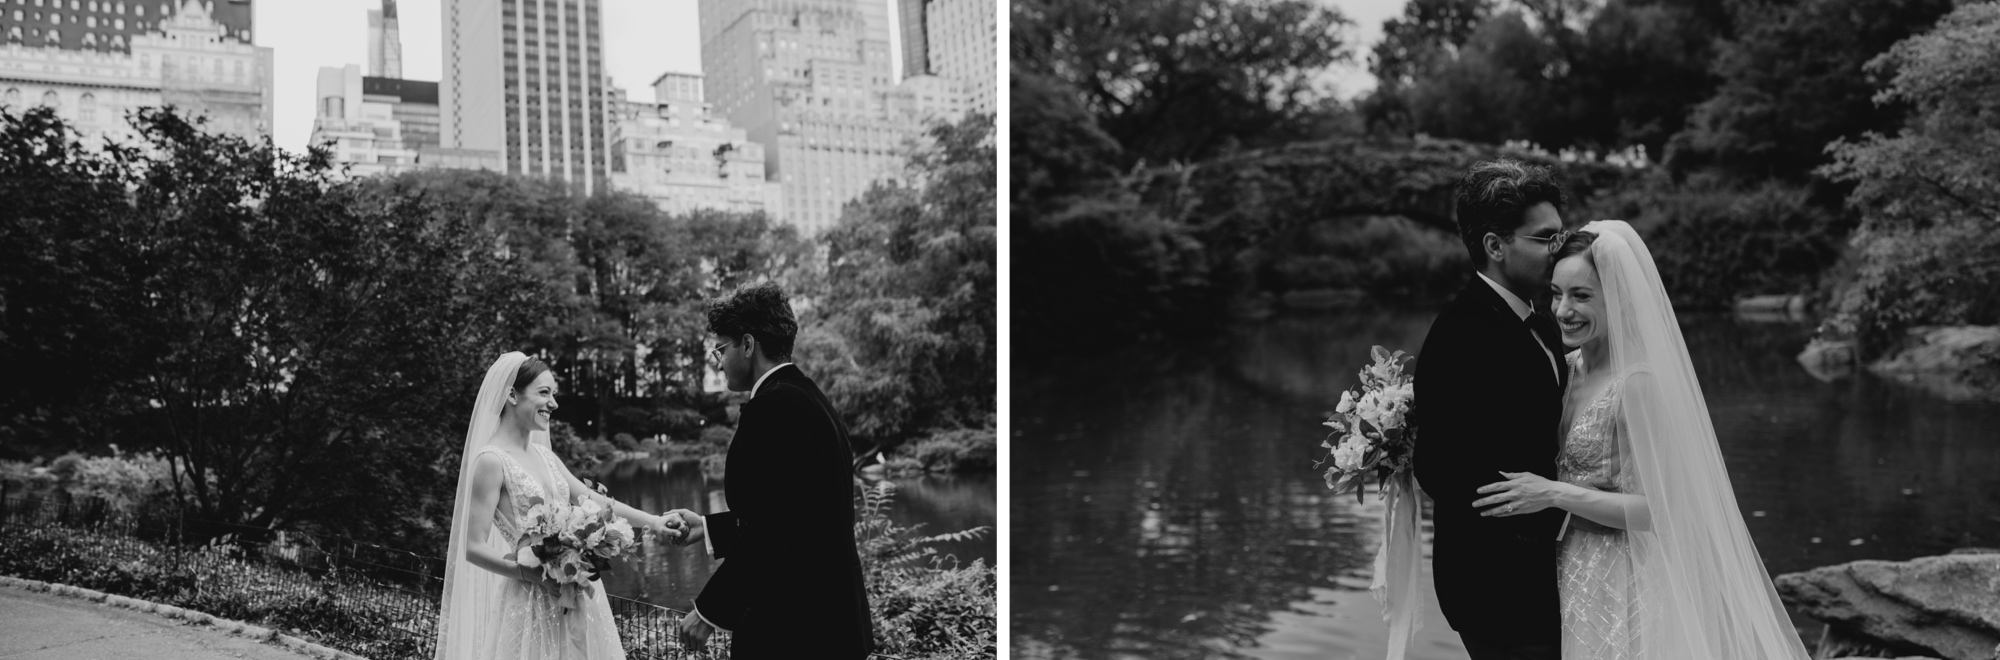 portrait of a bride and groom on their wedding day at gapstow bridge in central park, new york city